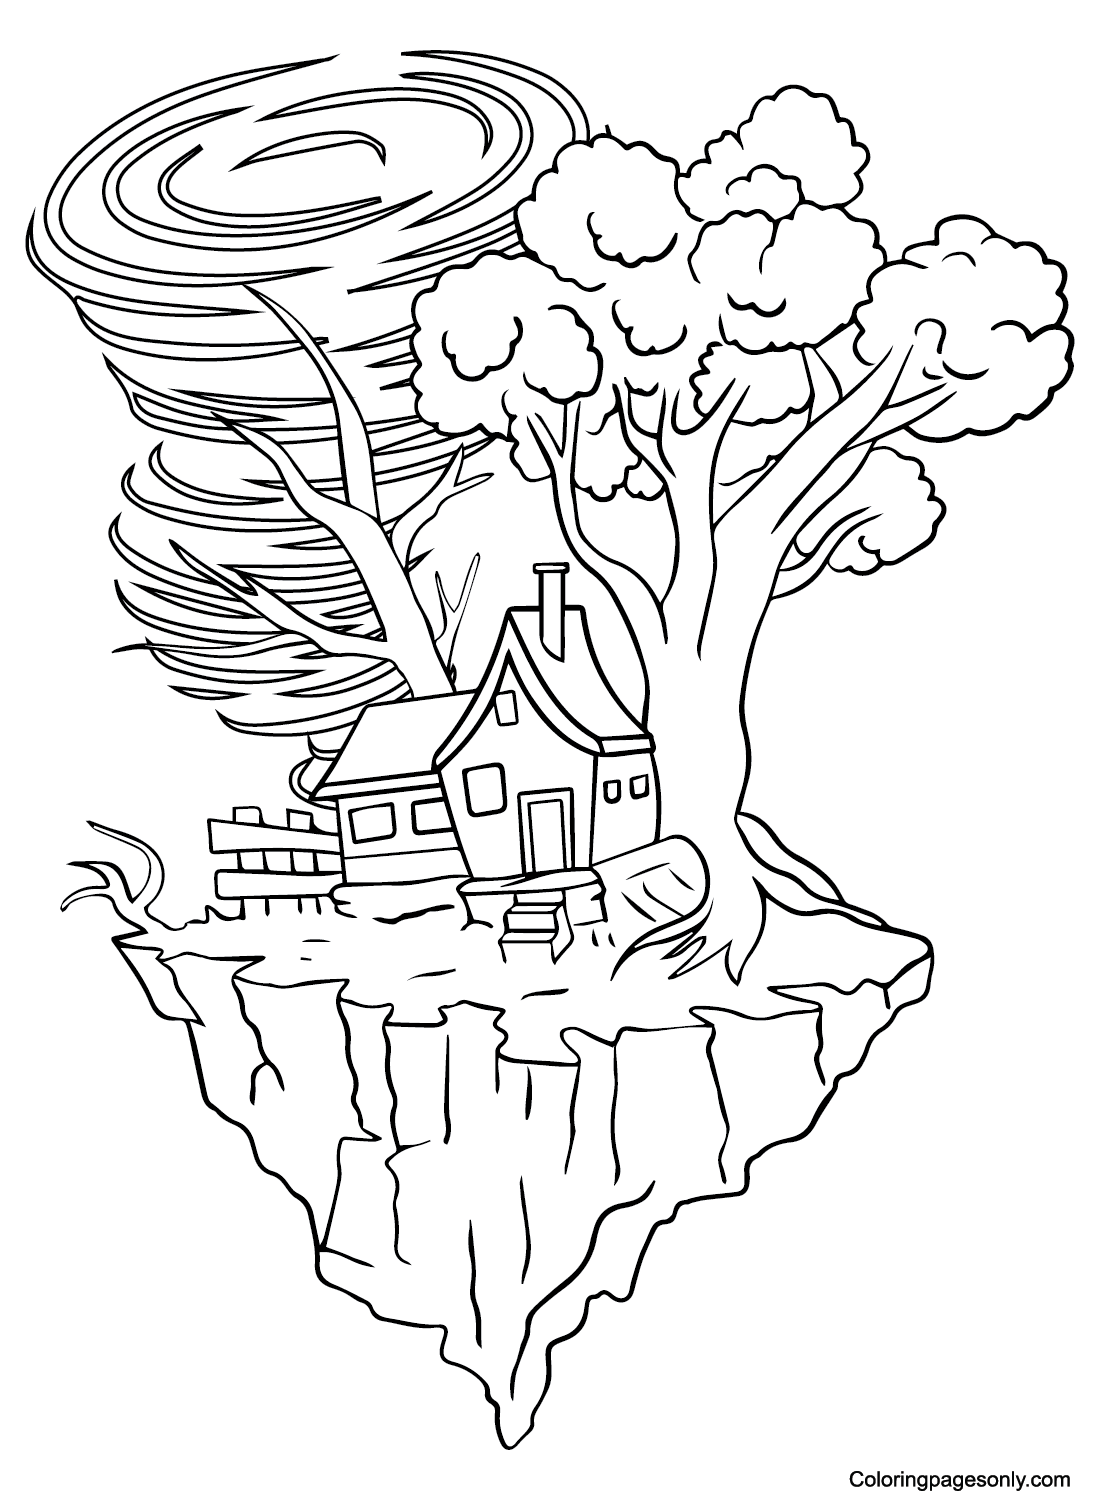 Drawing Tornado for Kids Coloring Page